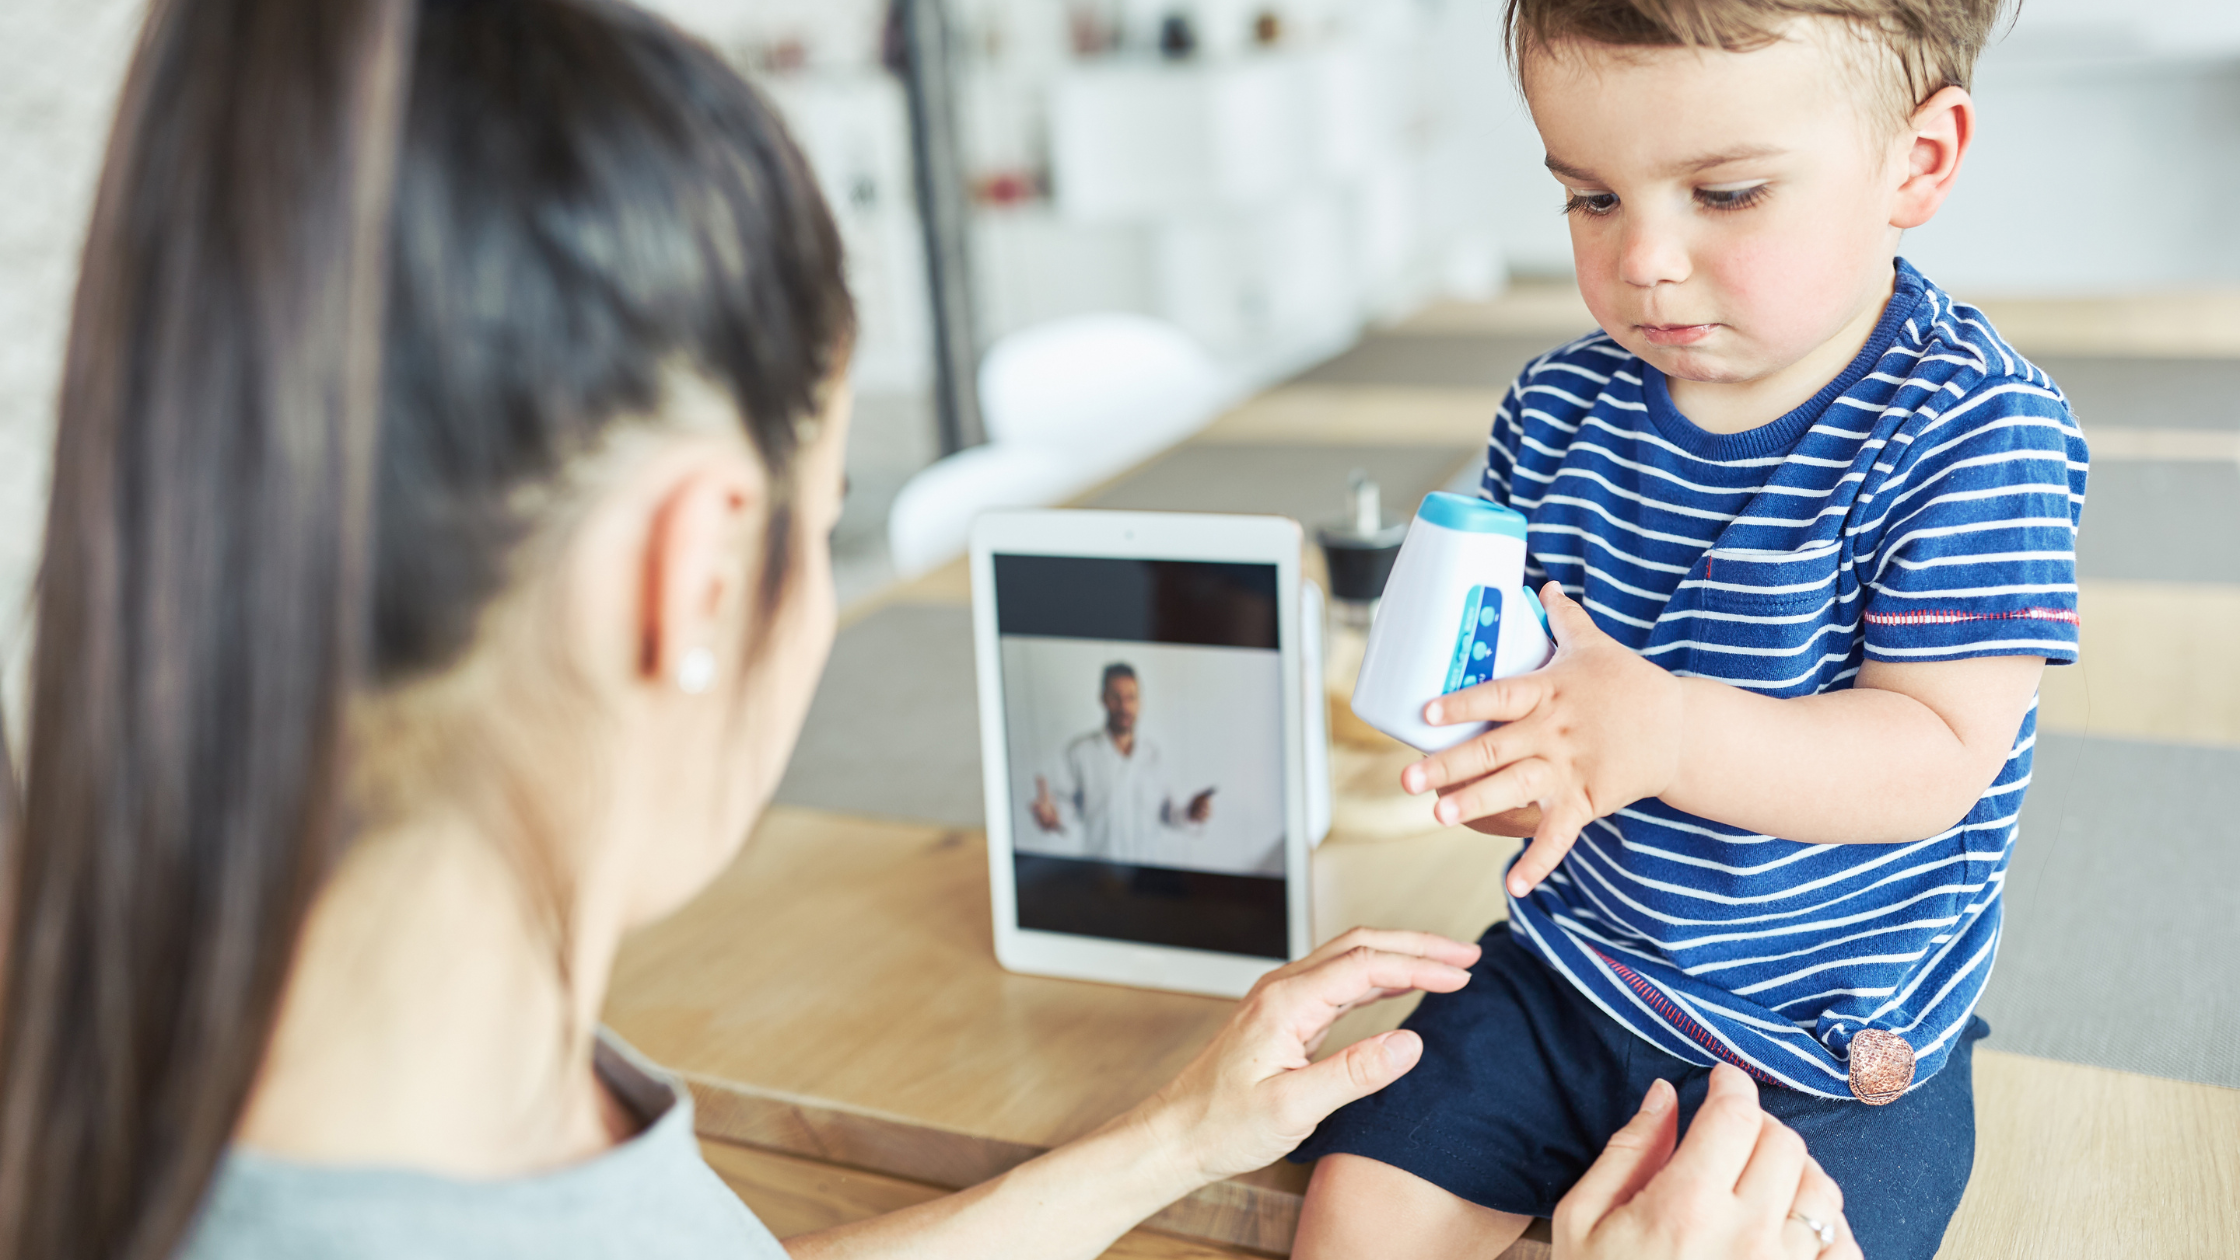 How telehealth is helping pediatricians in their healthcare practice